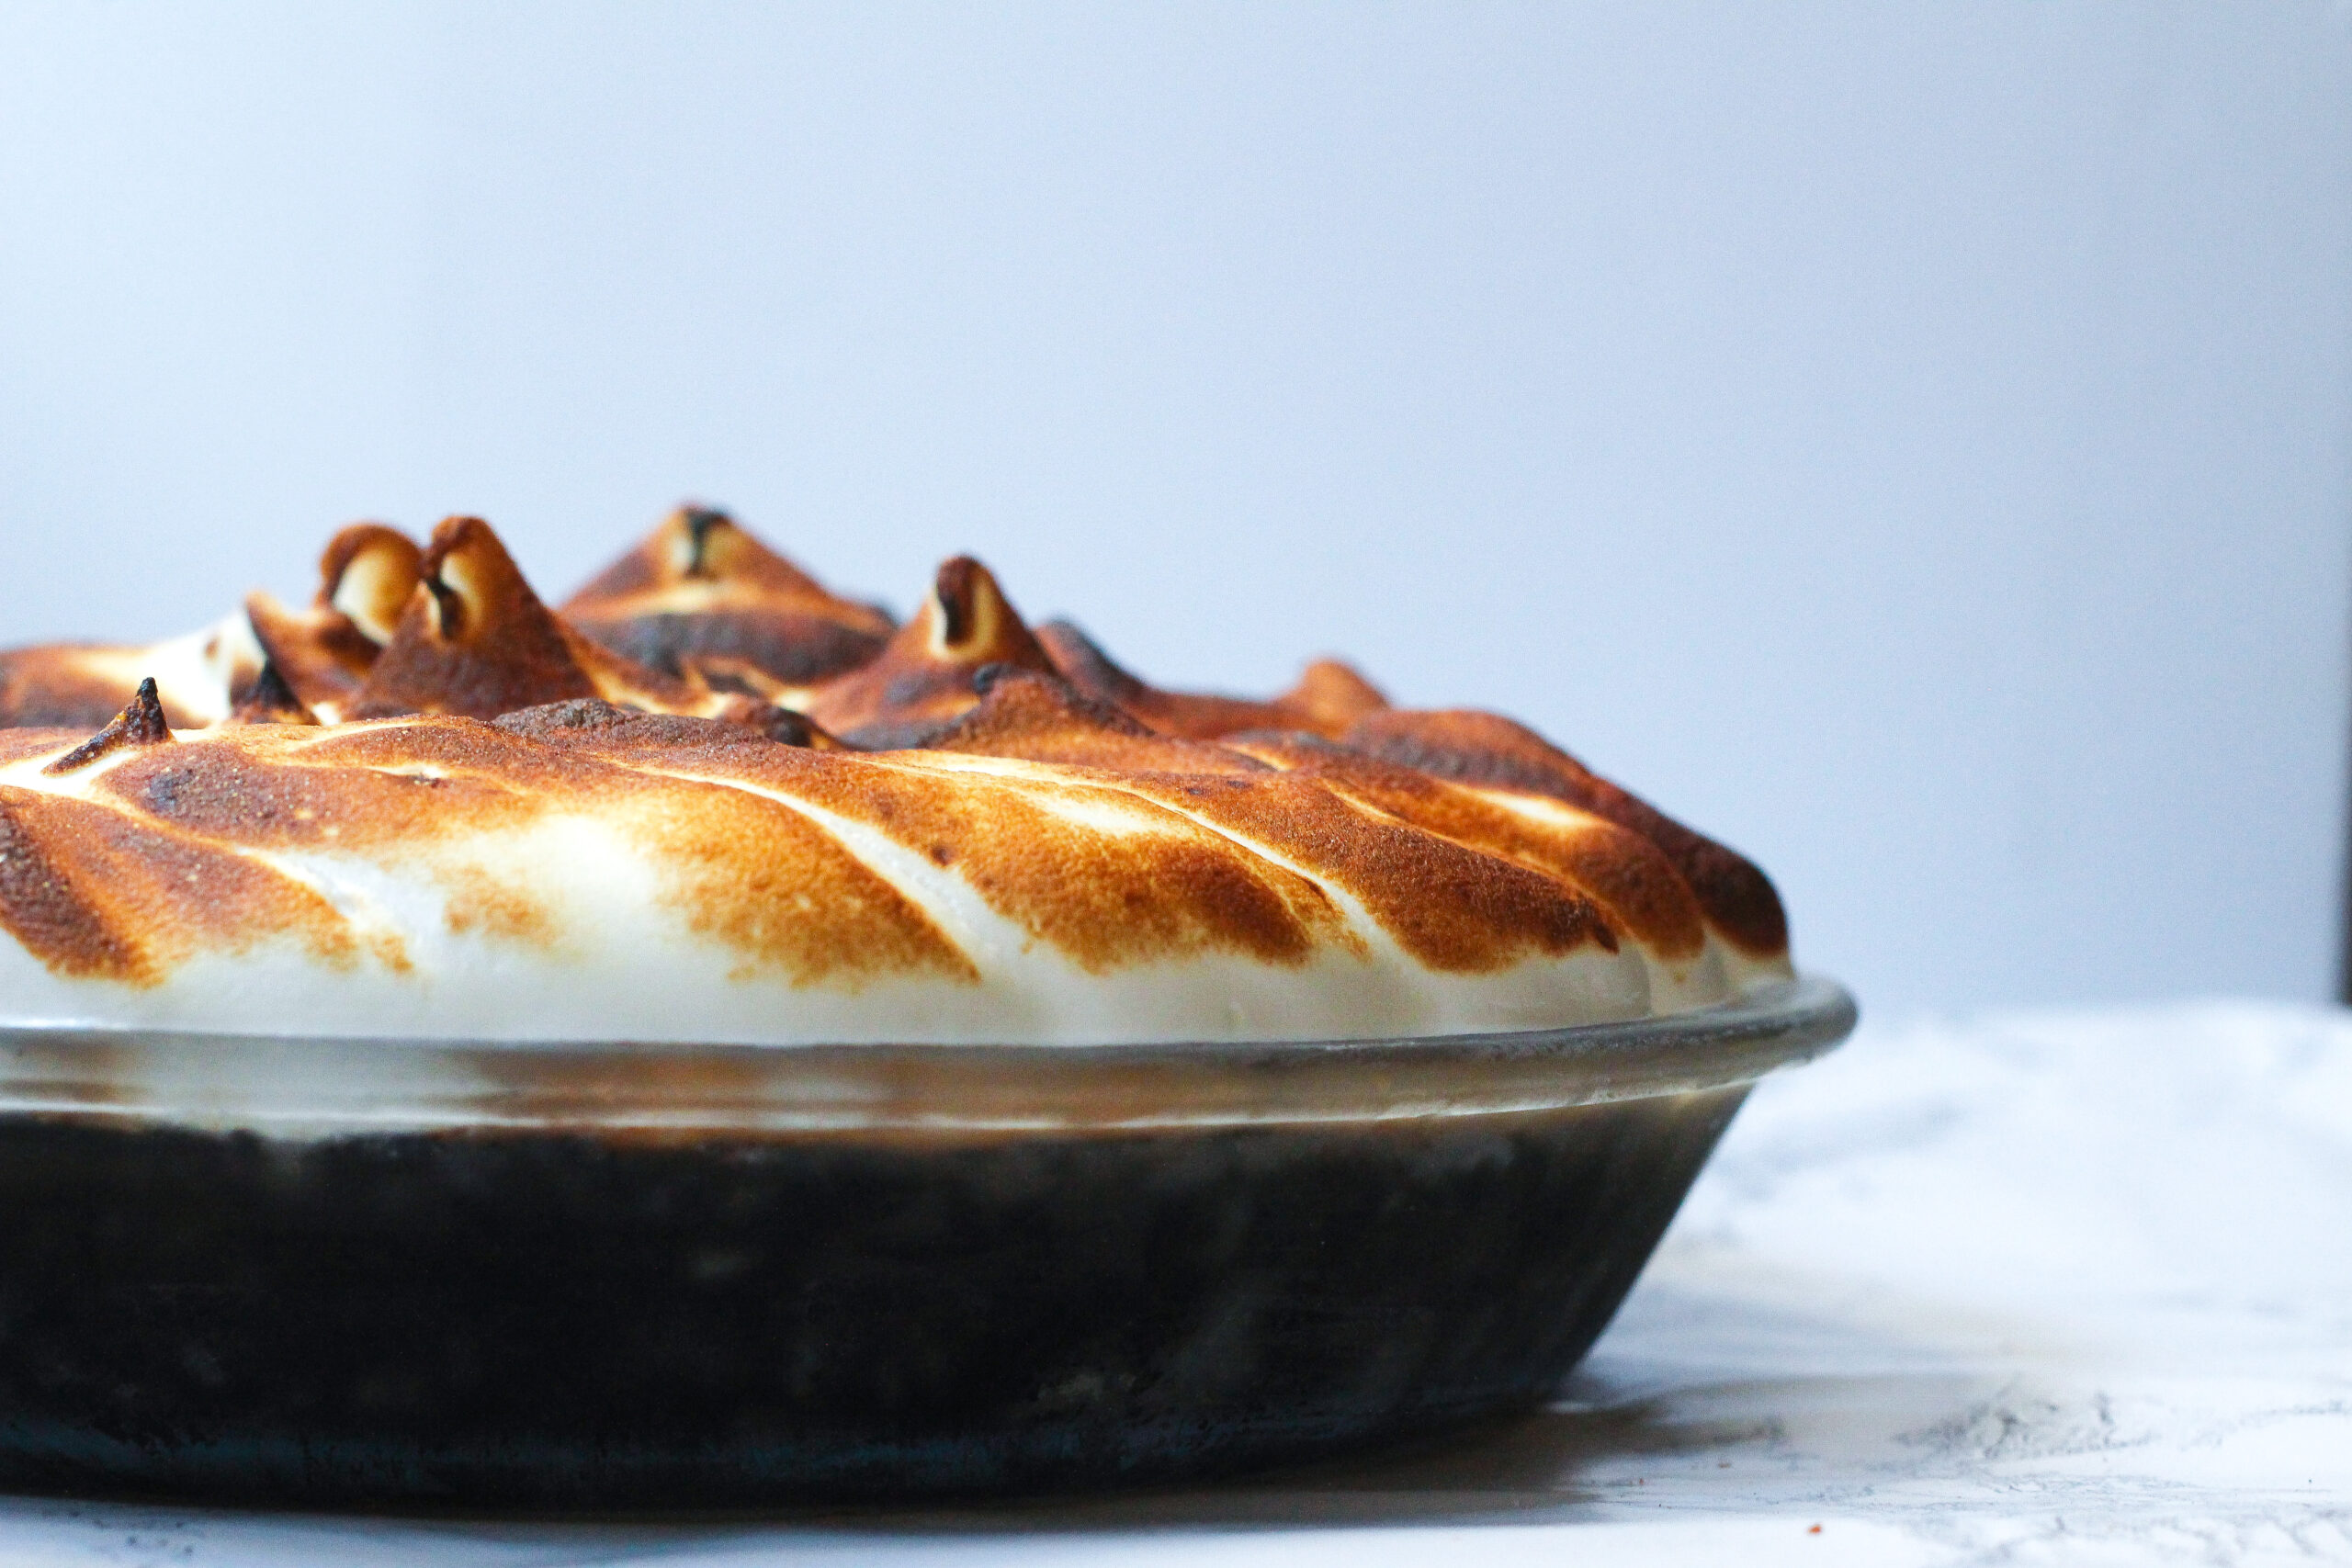 Side view of a mocha meringue pie, cutting out of frame on the left side of the image